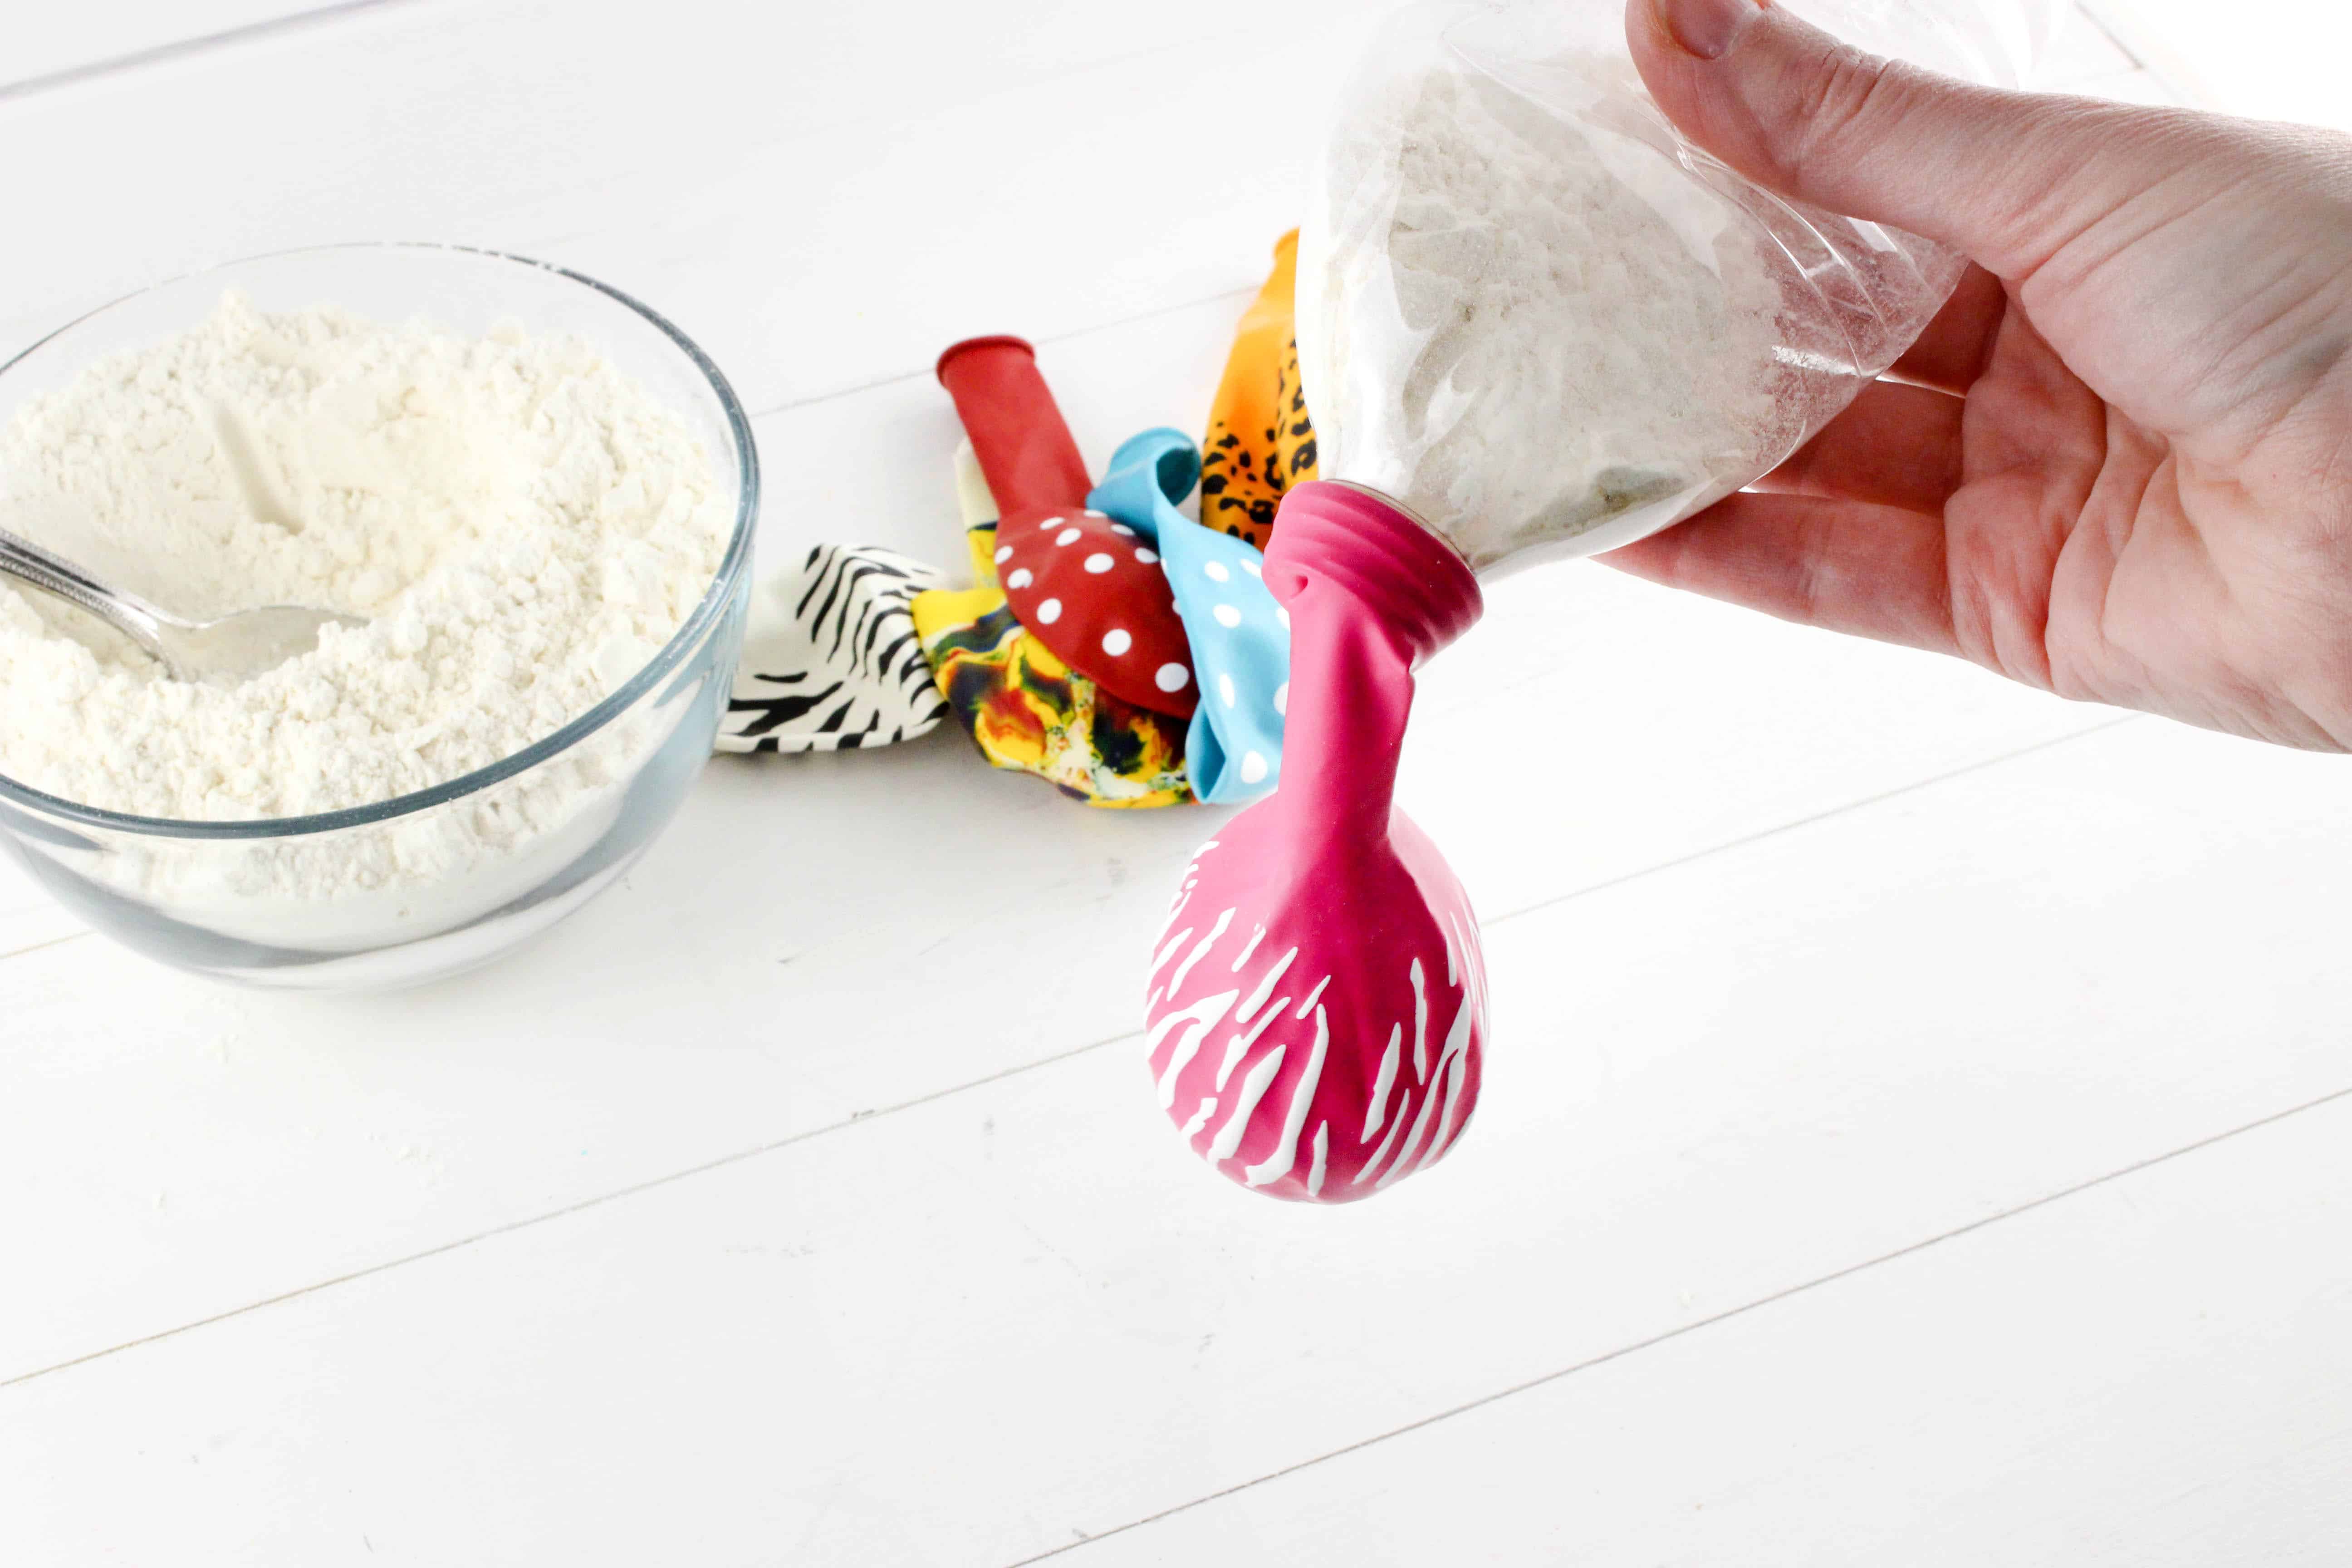 Preschoolers can poke, roll, shape, and squeeze this homemade squeeze ball for kids. It's great for building hand strength and calming fidgety kids.